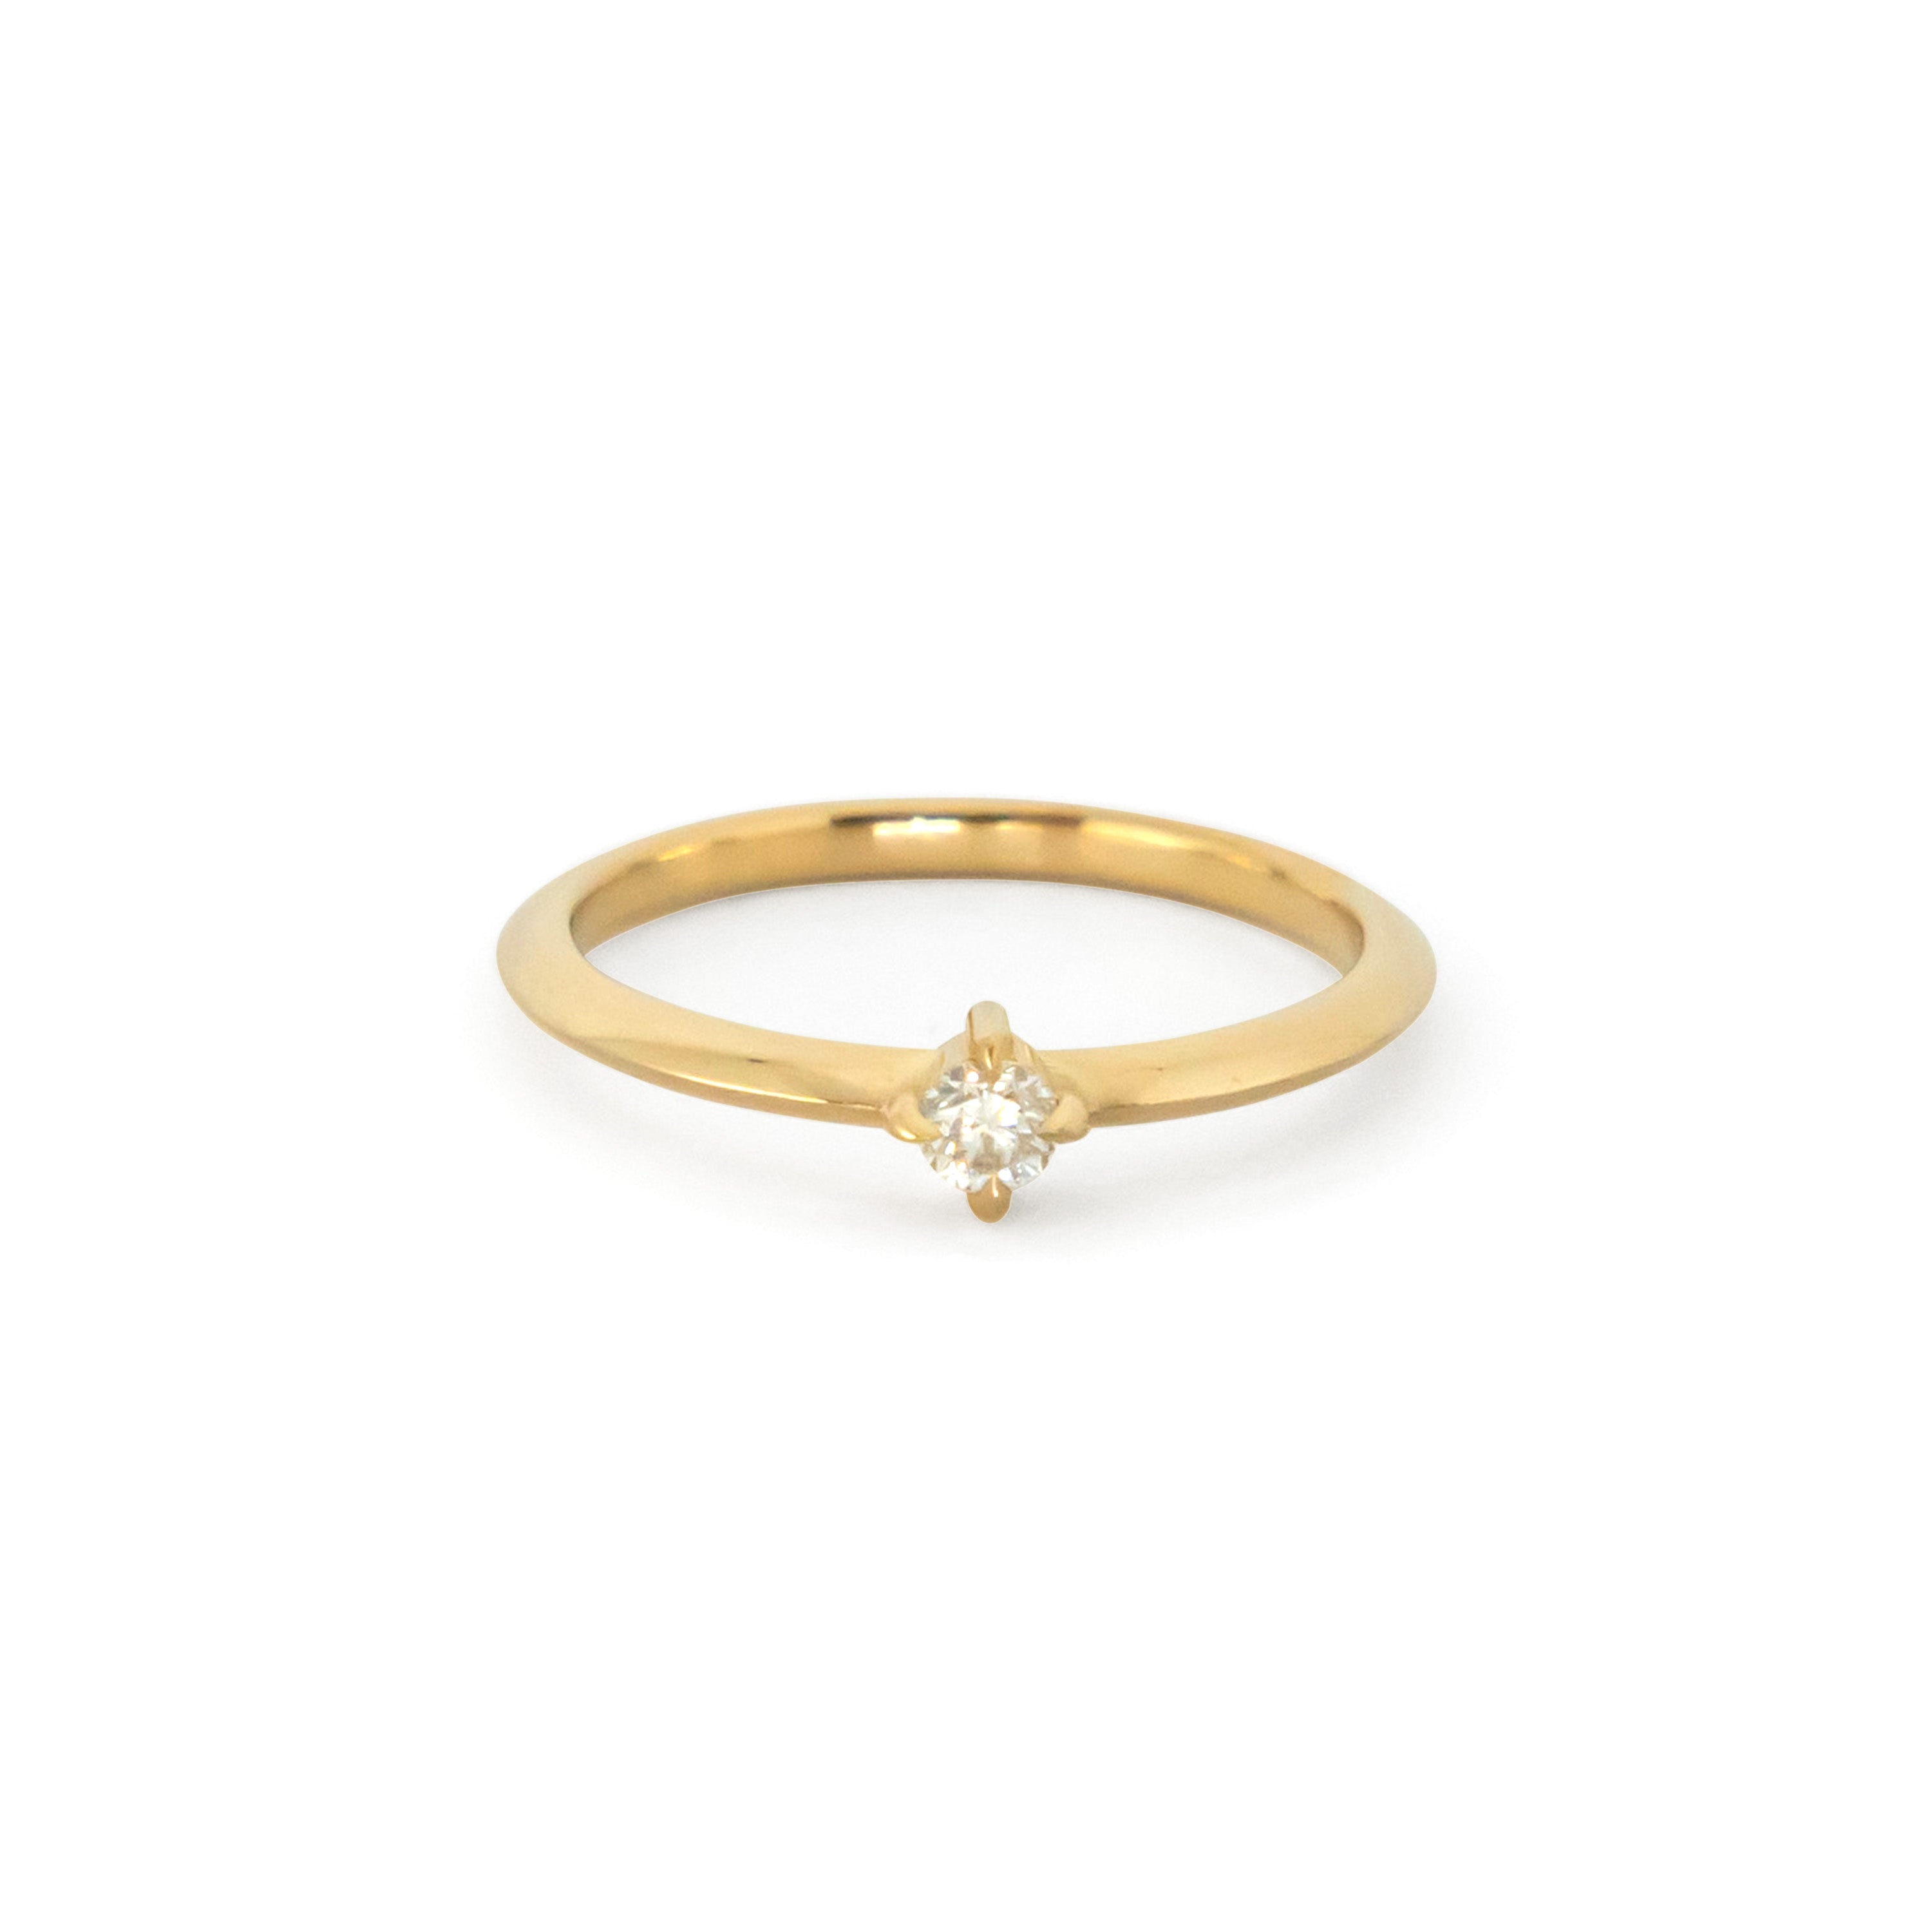 Knife Edge Solitaire Ring - 14k yellow gold